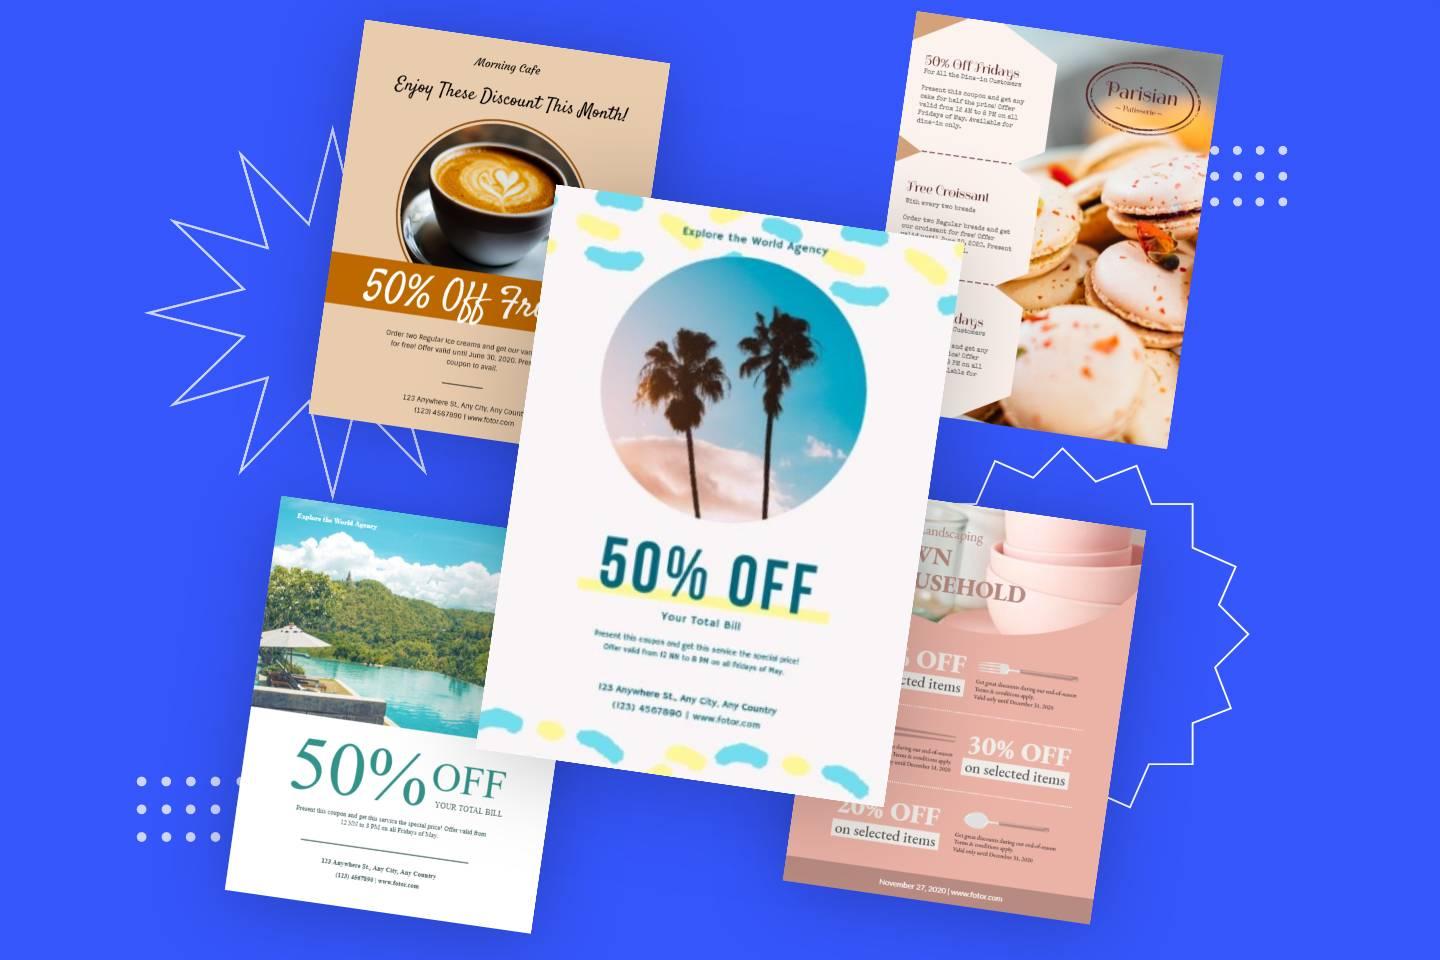 Five coupon templates from Fotor online coupon maker